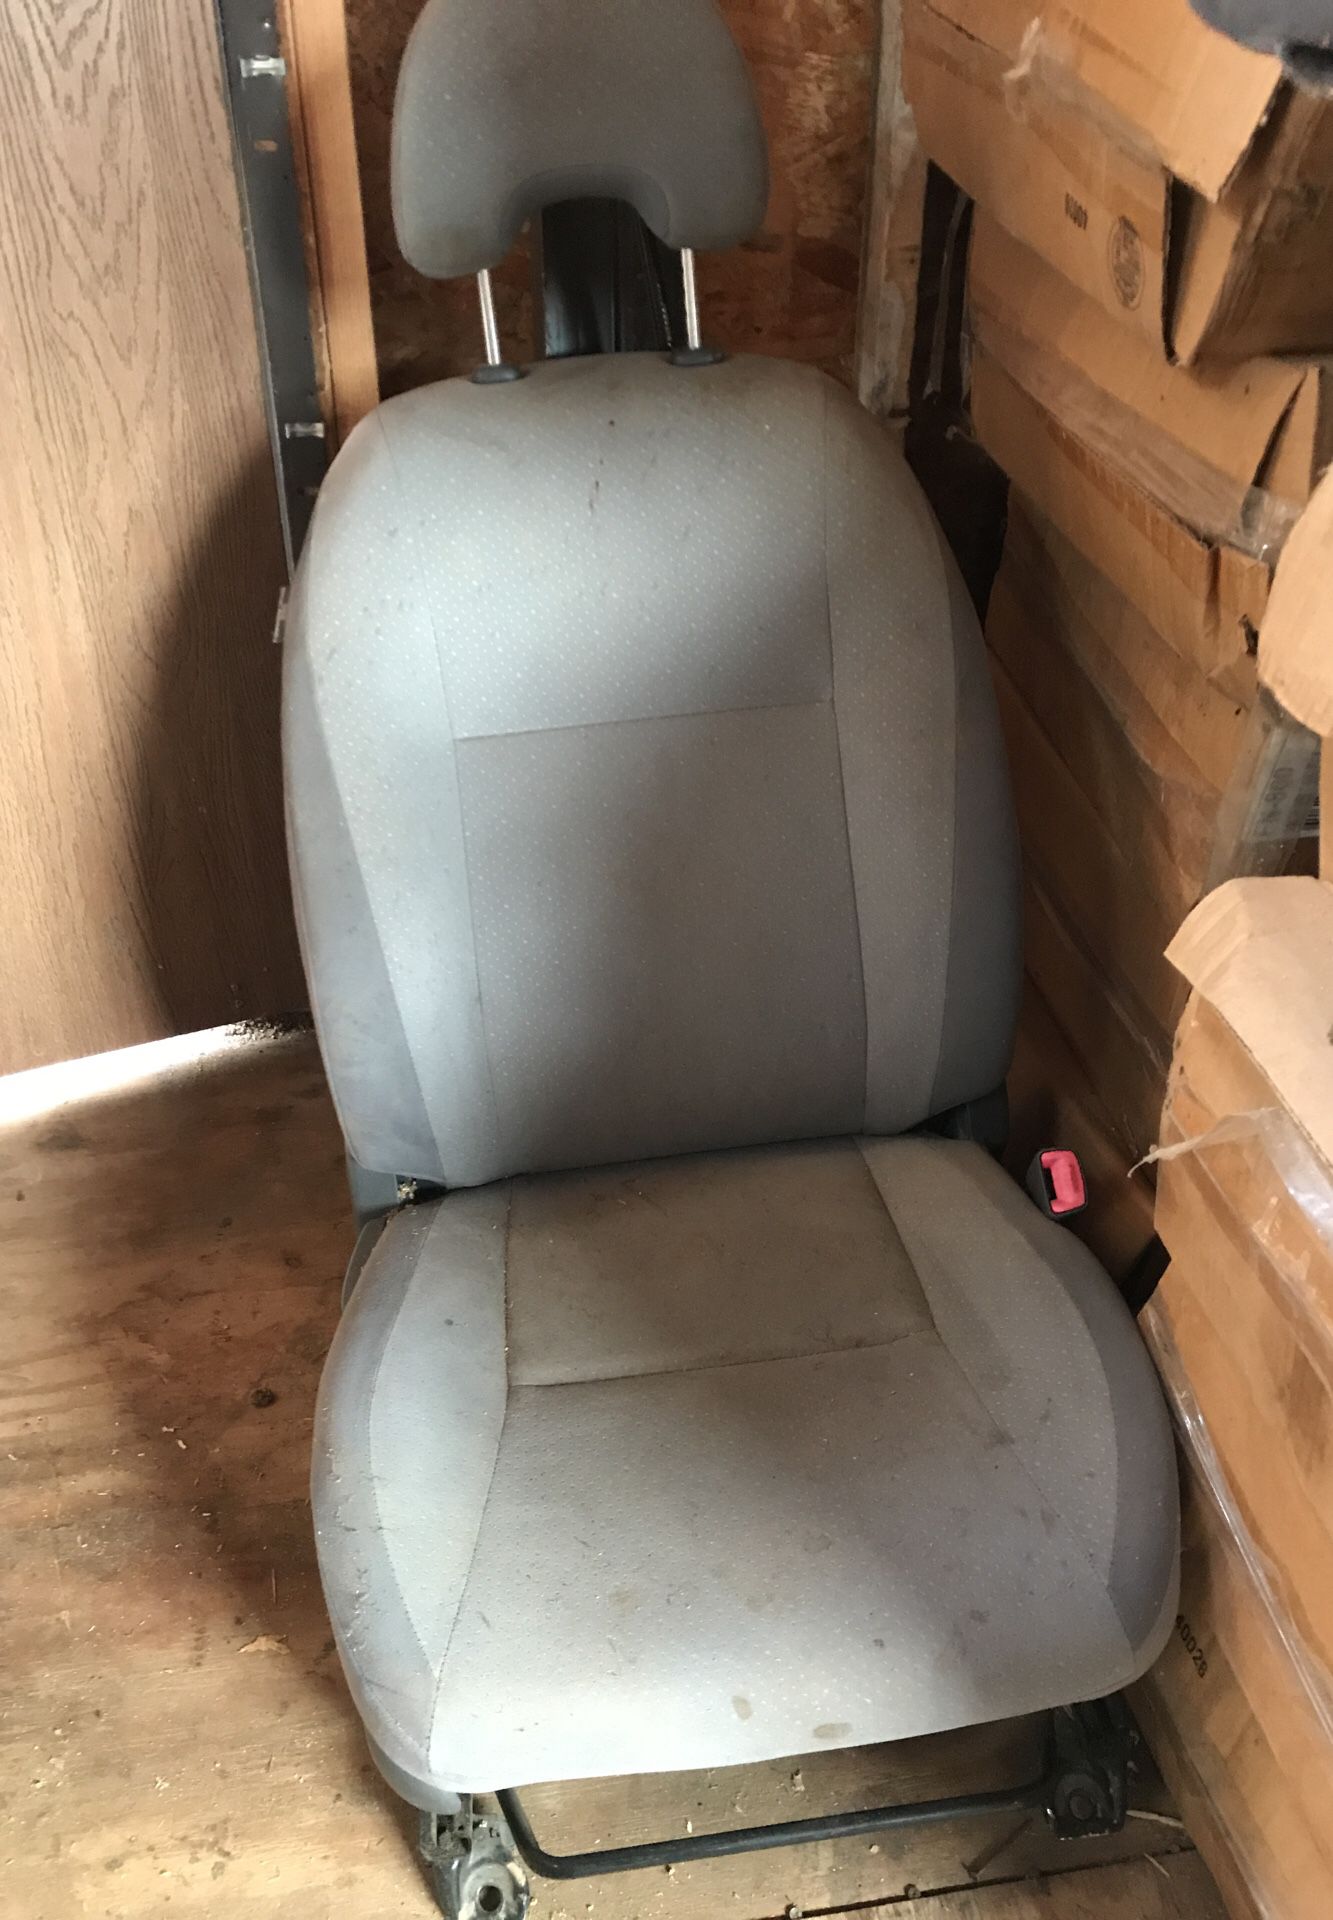 04-09 Toyota Prius front and rear seats